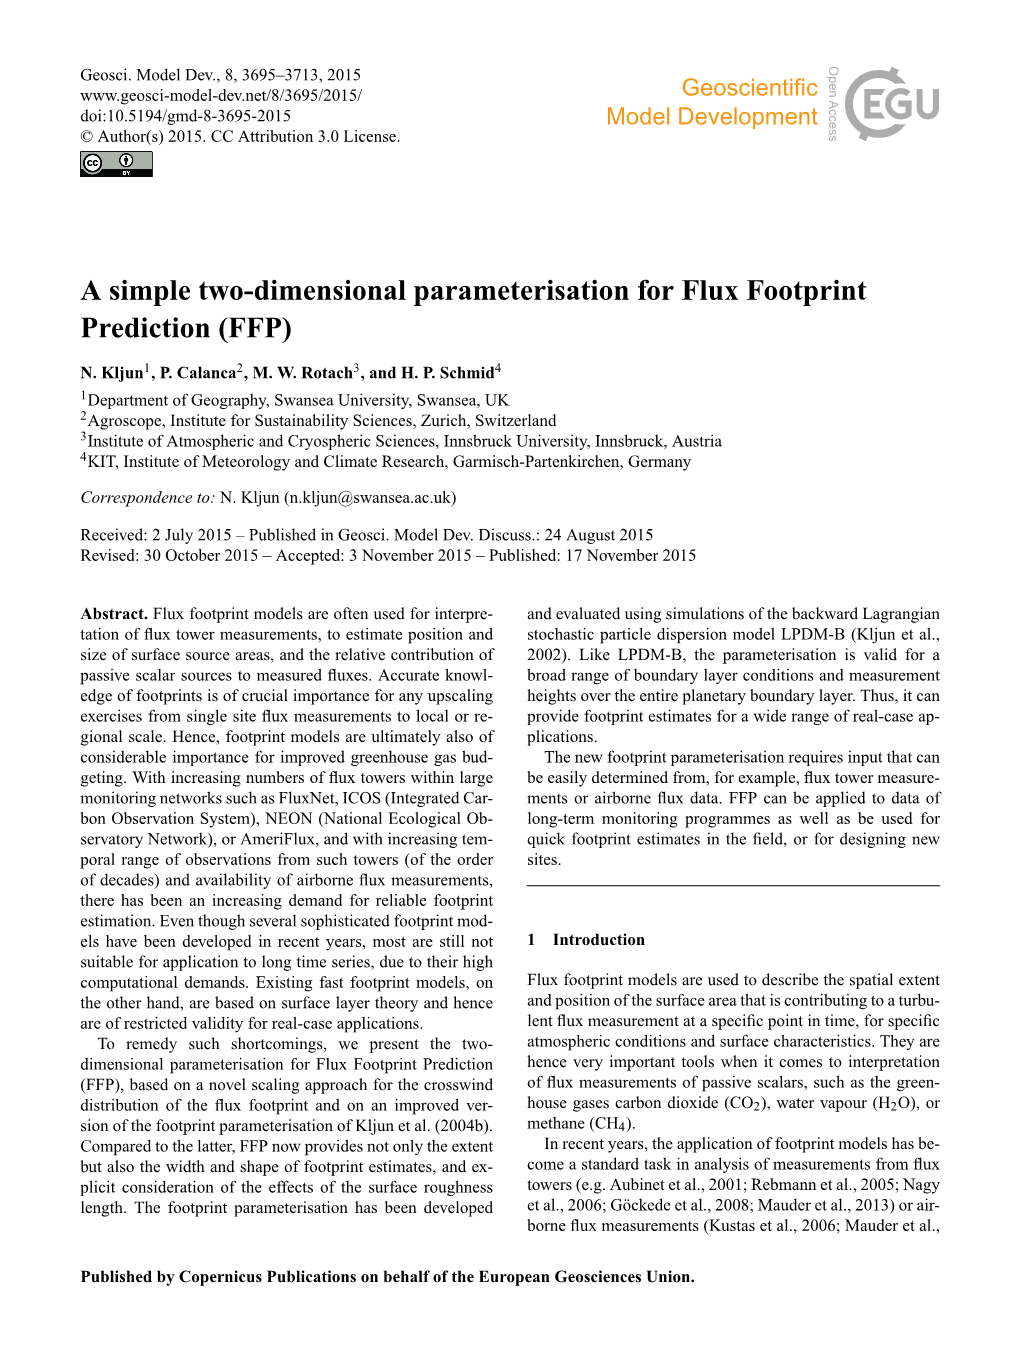 A Simple Two-Dimensional Parameterisation for Flux Footprint Prediction (FFP)